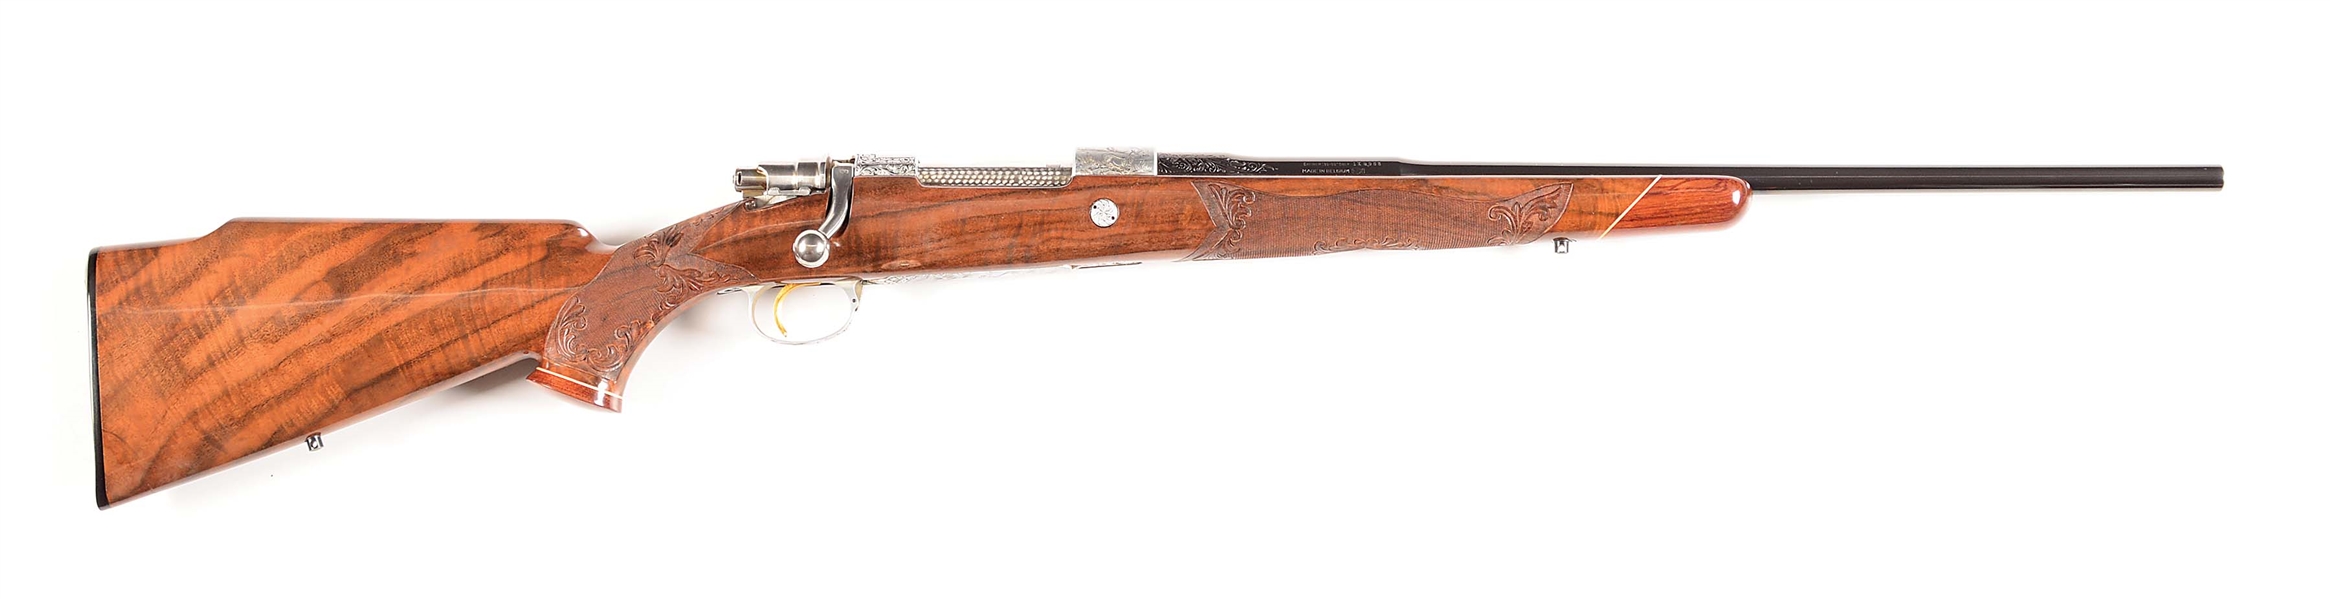 (M) BROWNING BAERTON AND RISACK ENGRAVED EARLY MEDALLION  BOLT ACTION RIFLE.